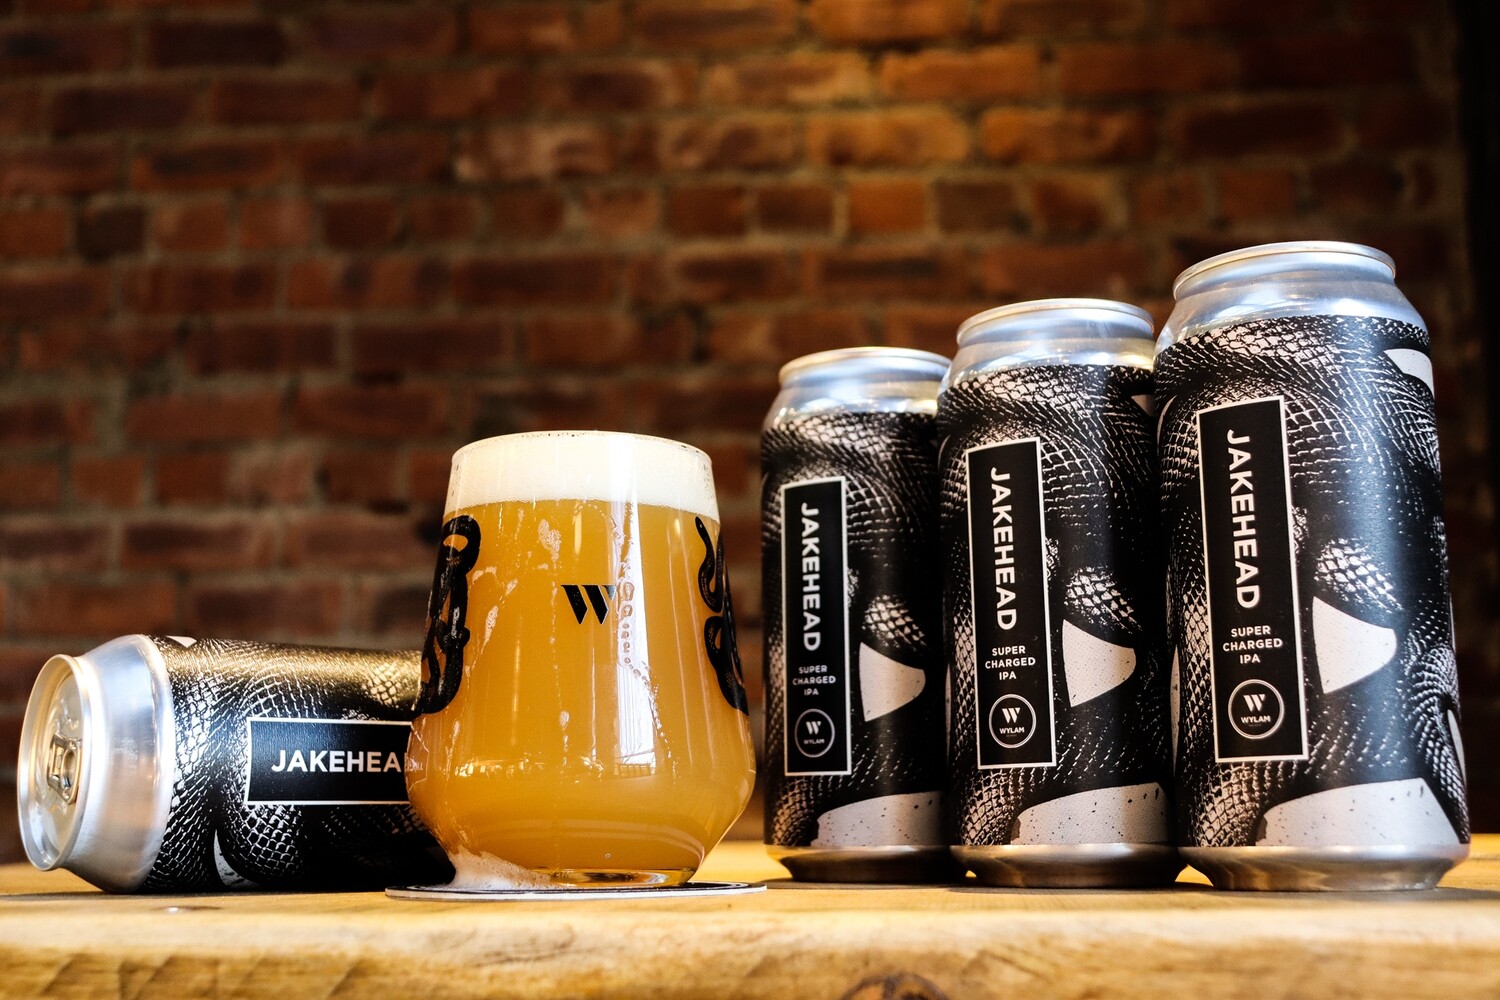 The Jakehead Four Pack | 4 x 440ml Cans + 1 x Ltd. Edition Jakey Glass